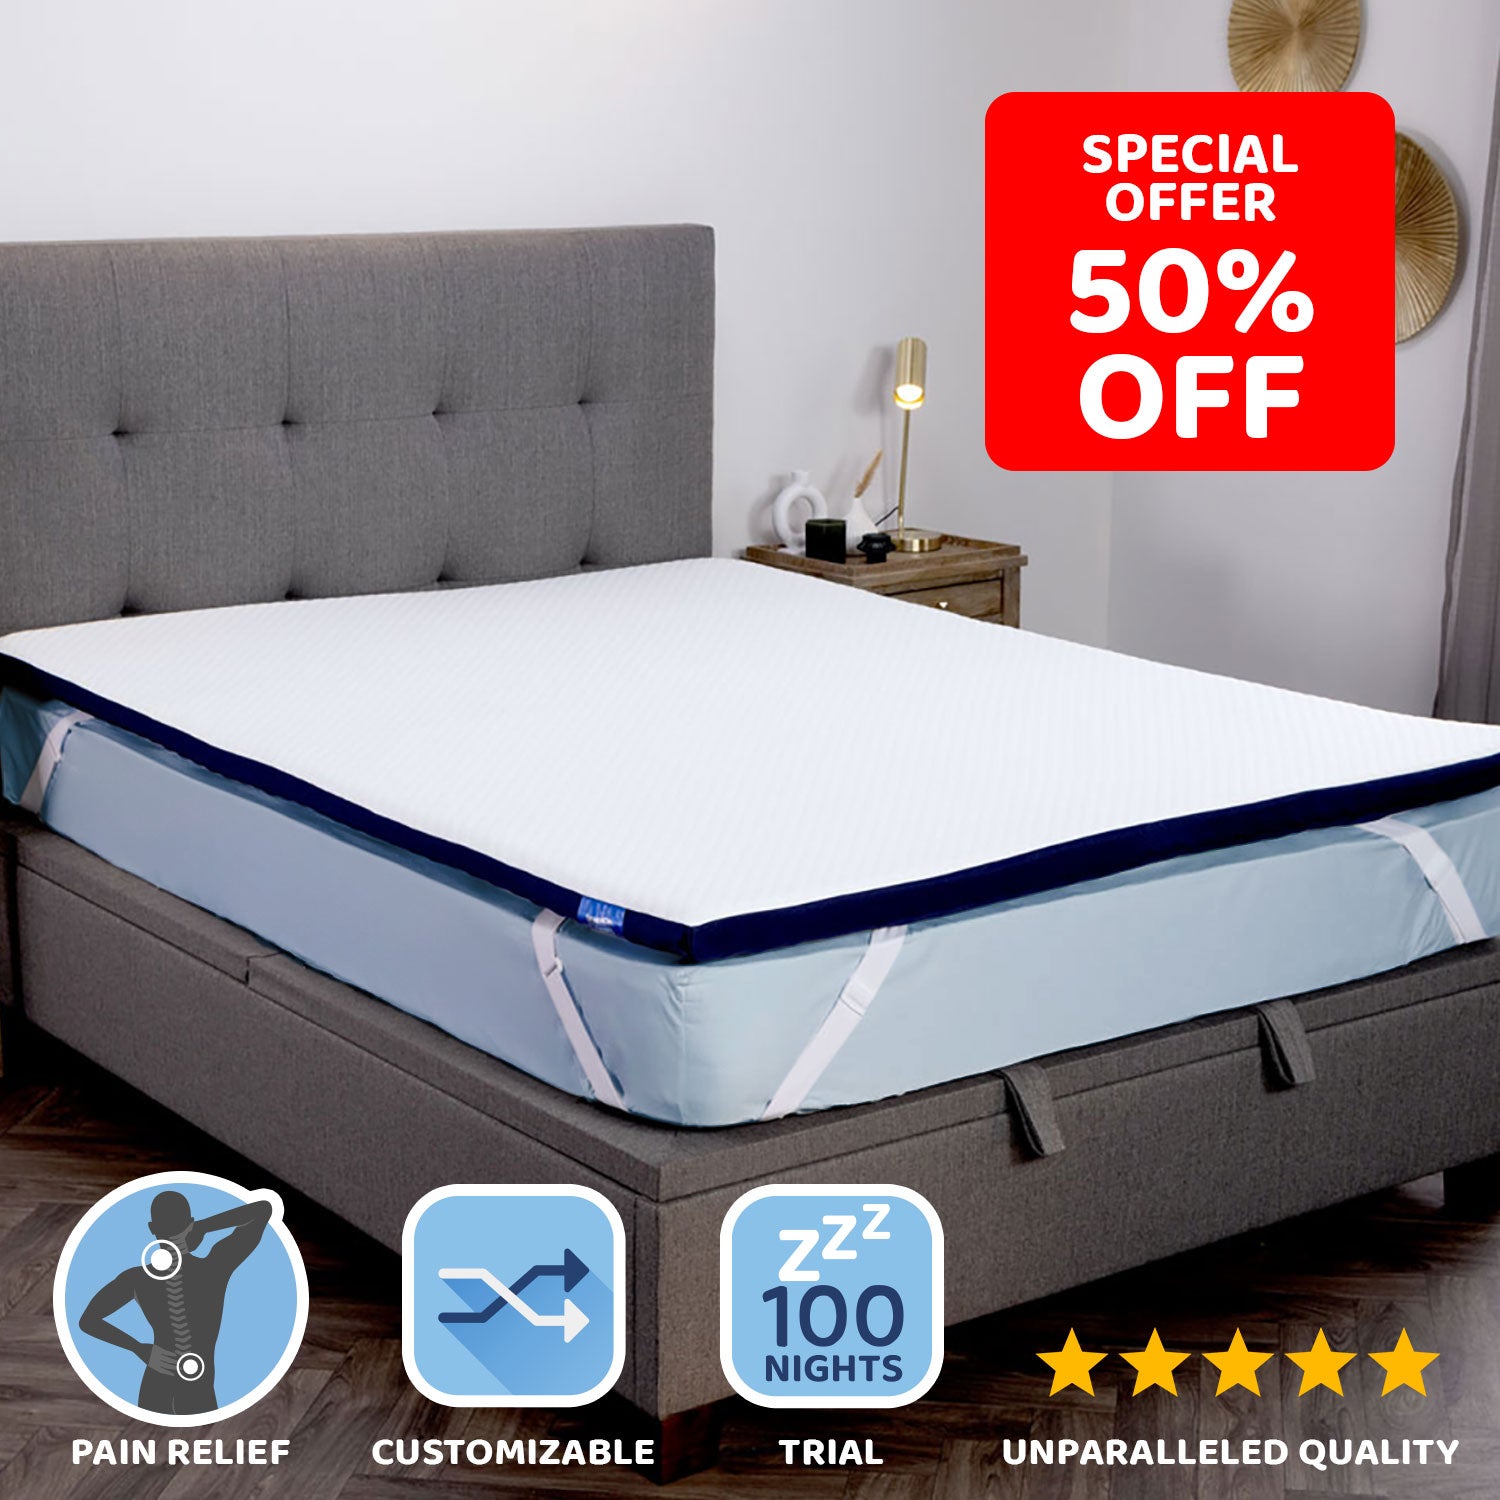 A Seriously Comfortable Revive Plus Mattress Topper for pain relief with reversible soft and firm side. 50% off  